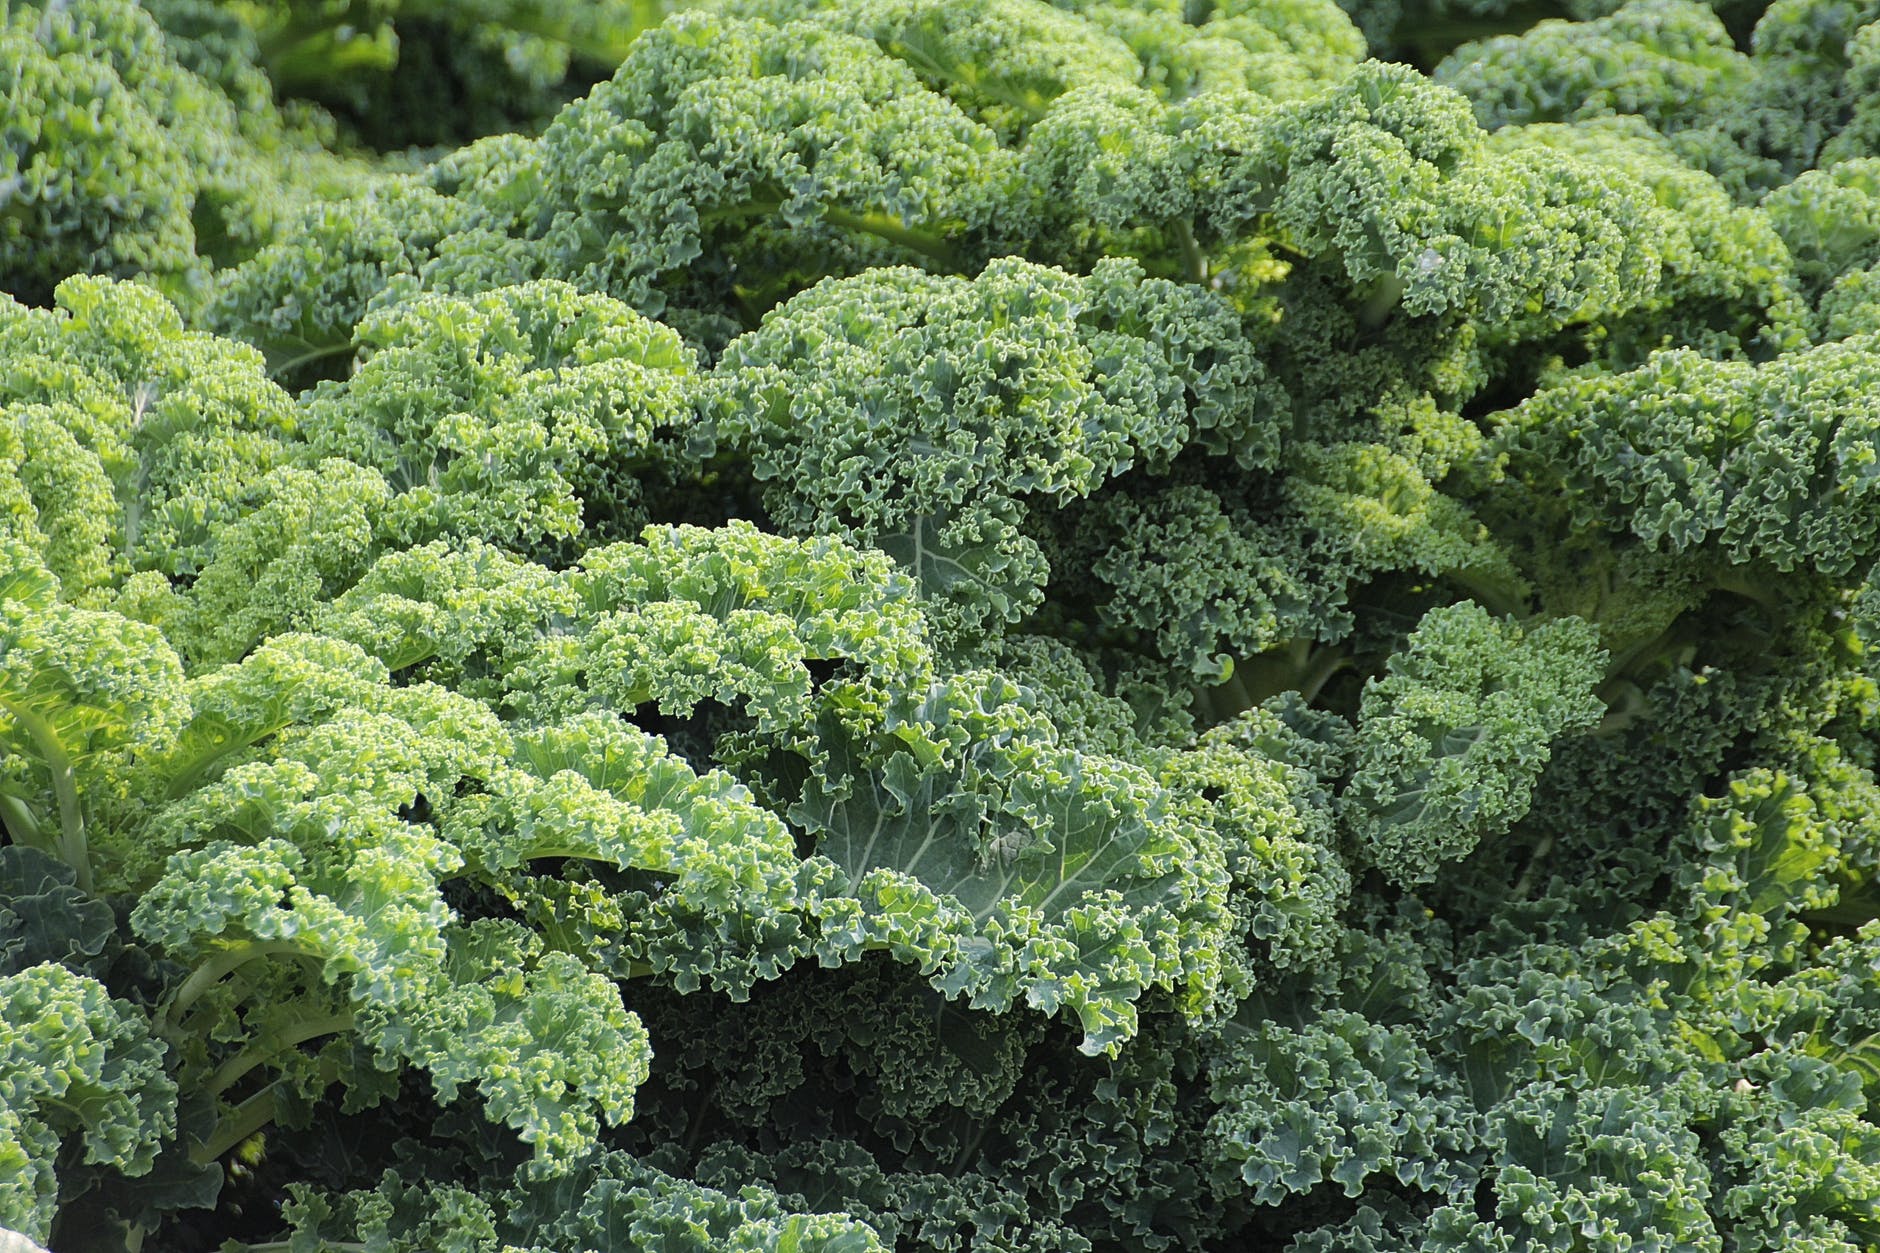 Featured image for “Biopesticides (Seem to) Perform Poorly Against Black Spot on Kale”